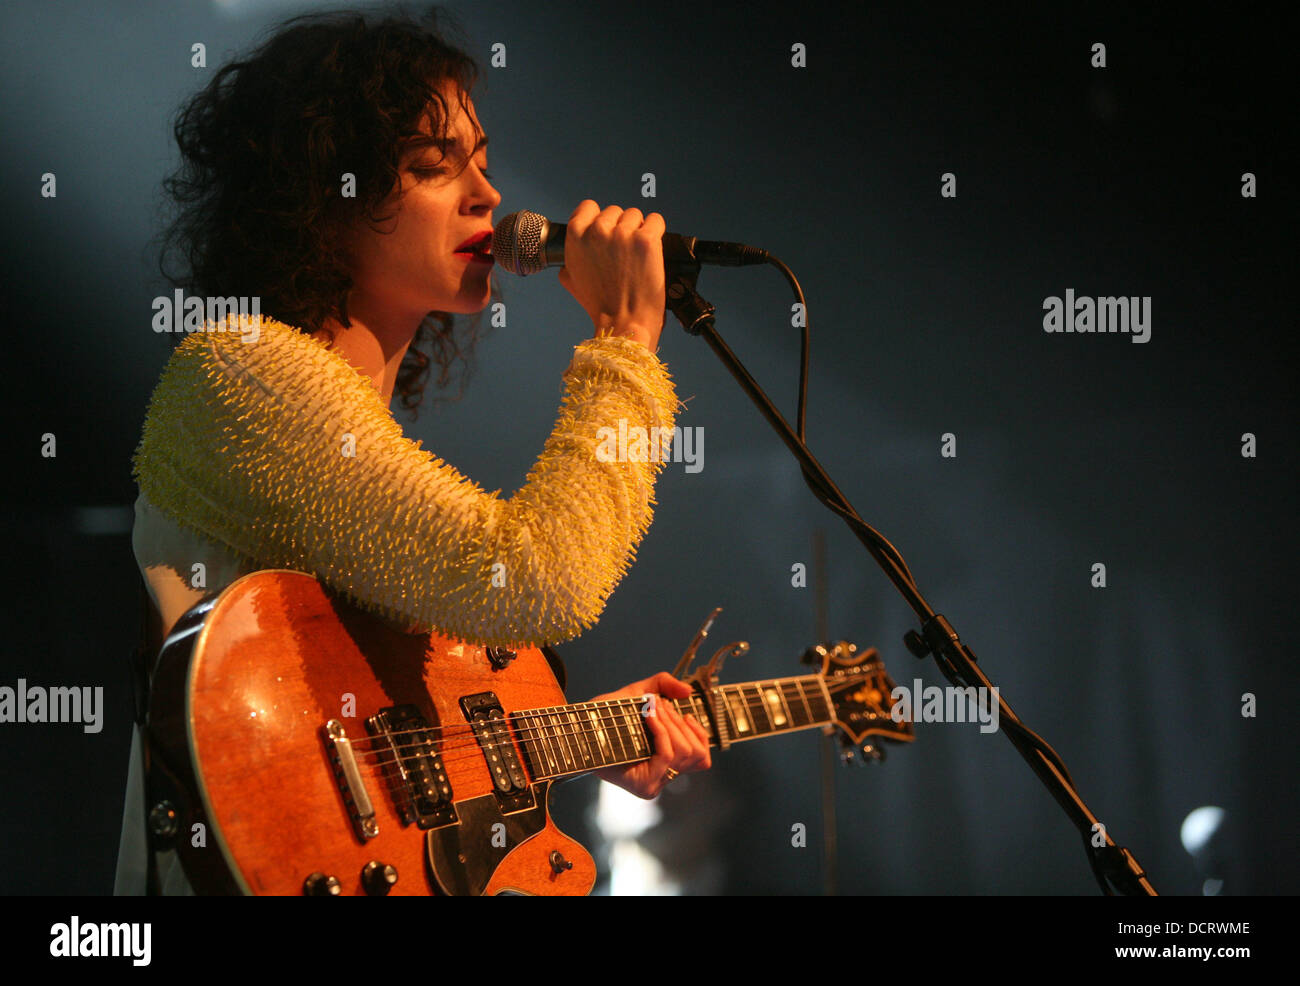 St Vincent Crossing Border Festival at The Hague - Day 1 The Hague, The ...